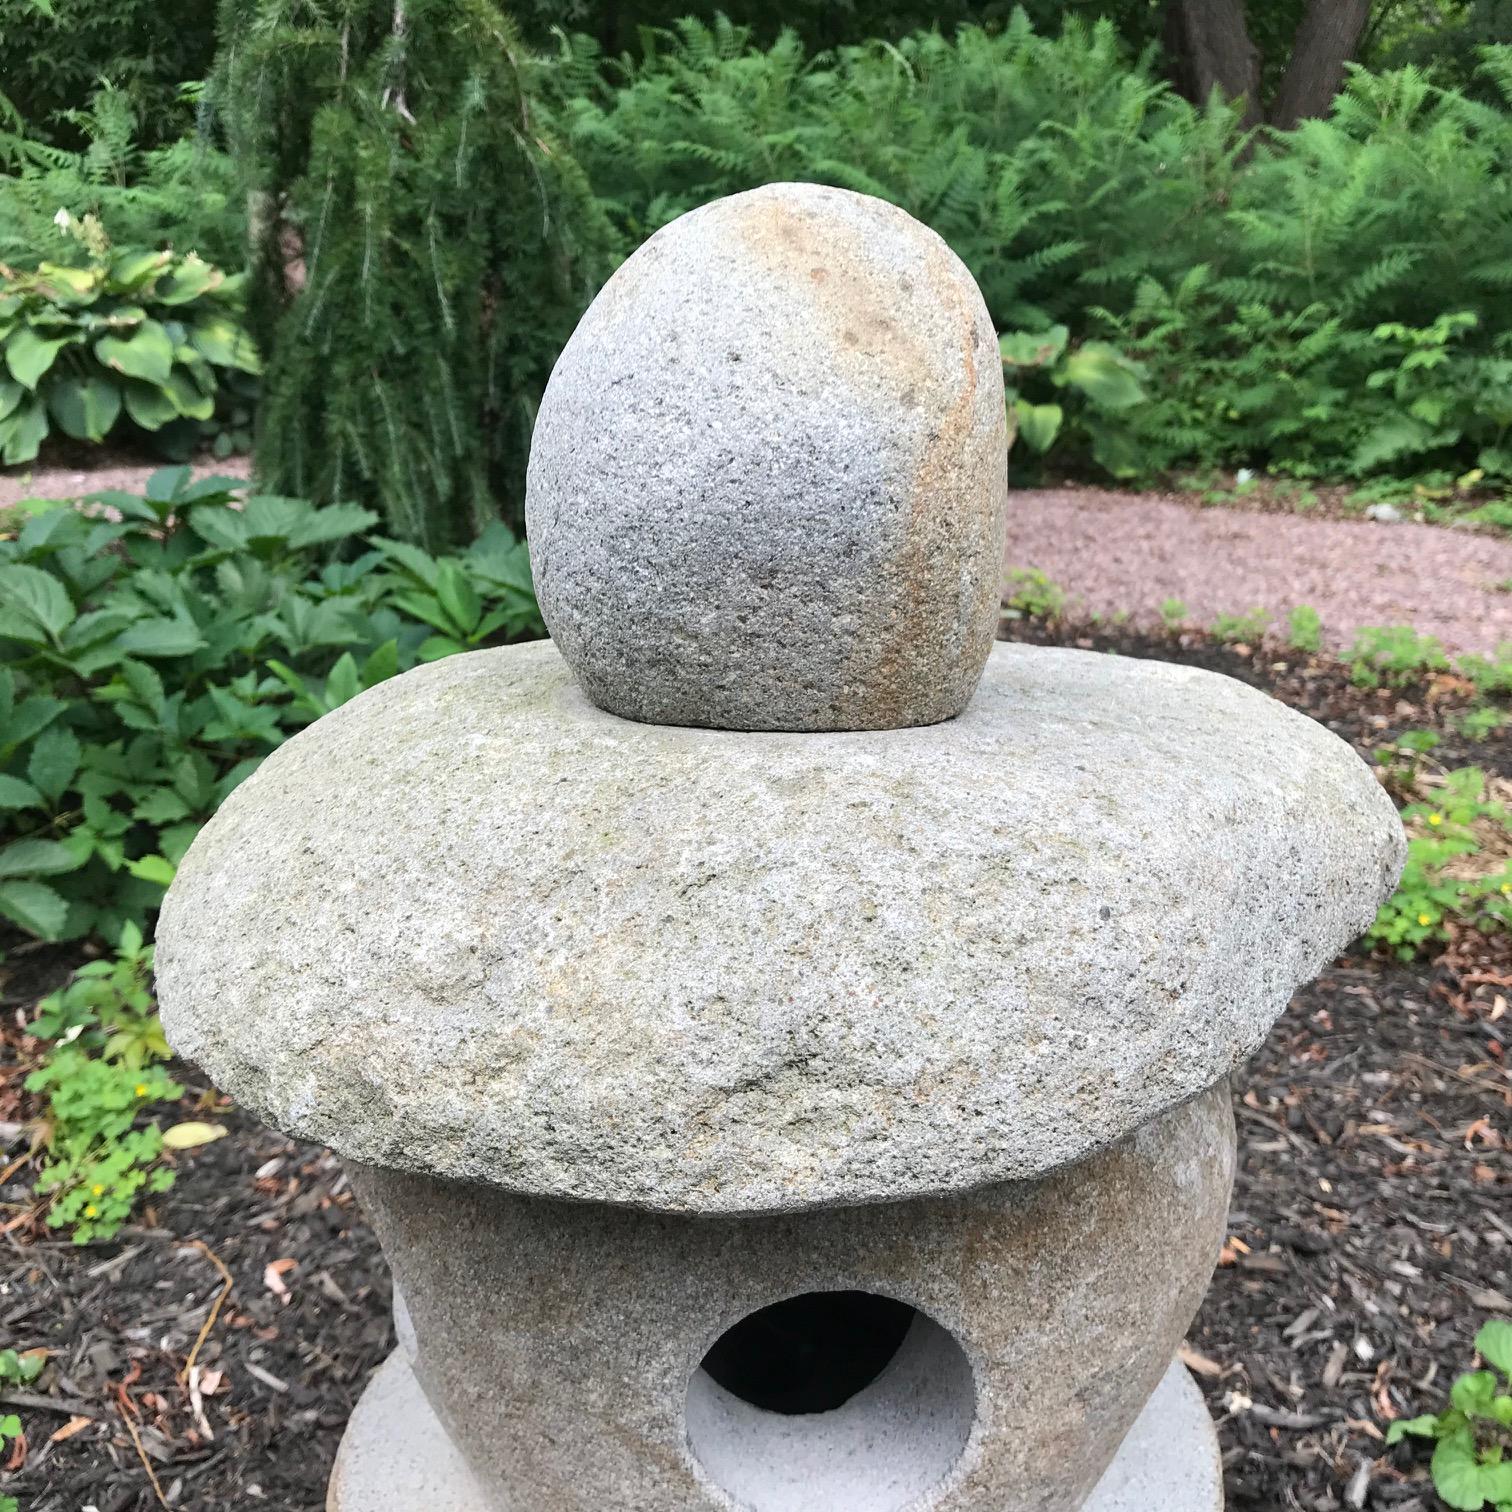 Here's a very nice sized stone -Spirit- lantern carved from natural boulders and ideally suited for a small to medium garden out of doors or inside in your favourite sun space. 

The striking and well proportioned stone lantern is fashioned in